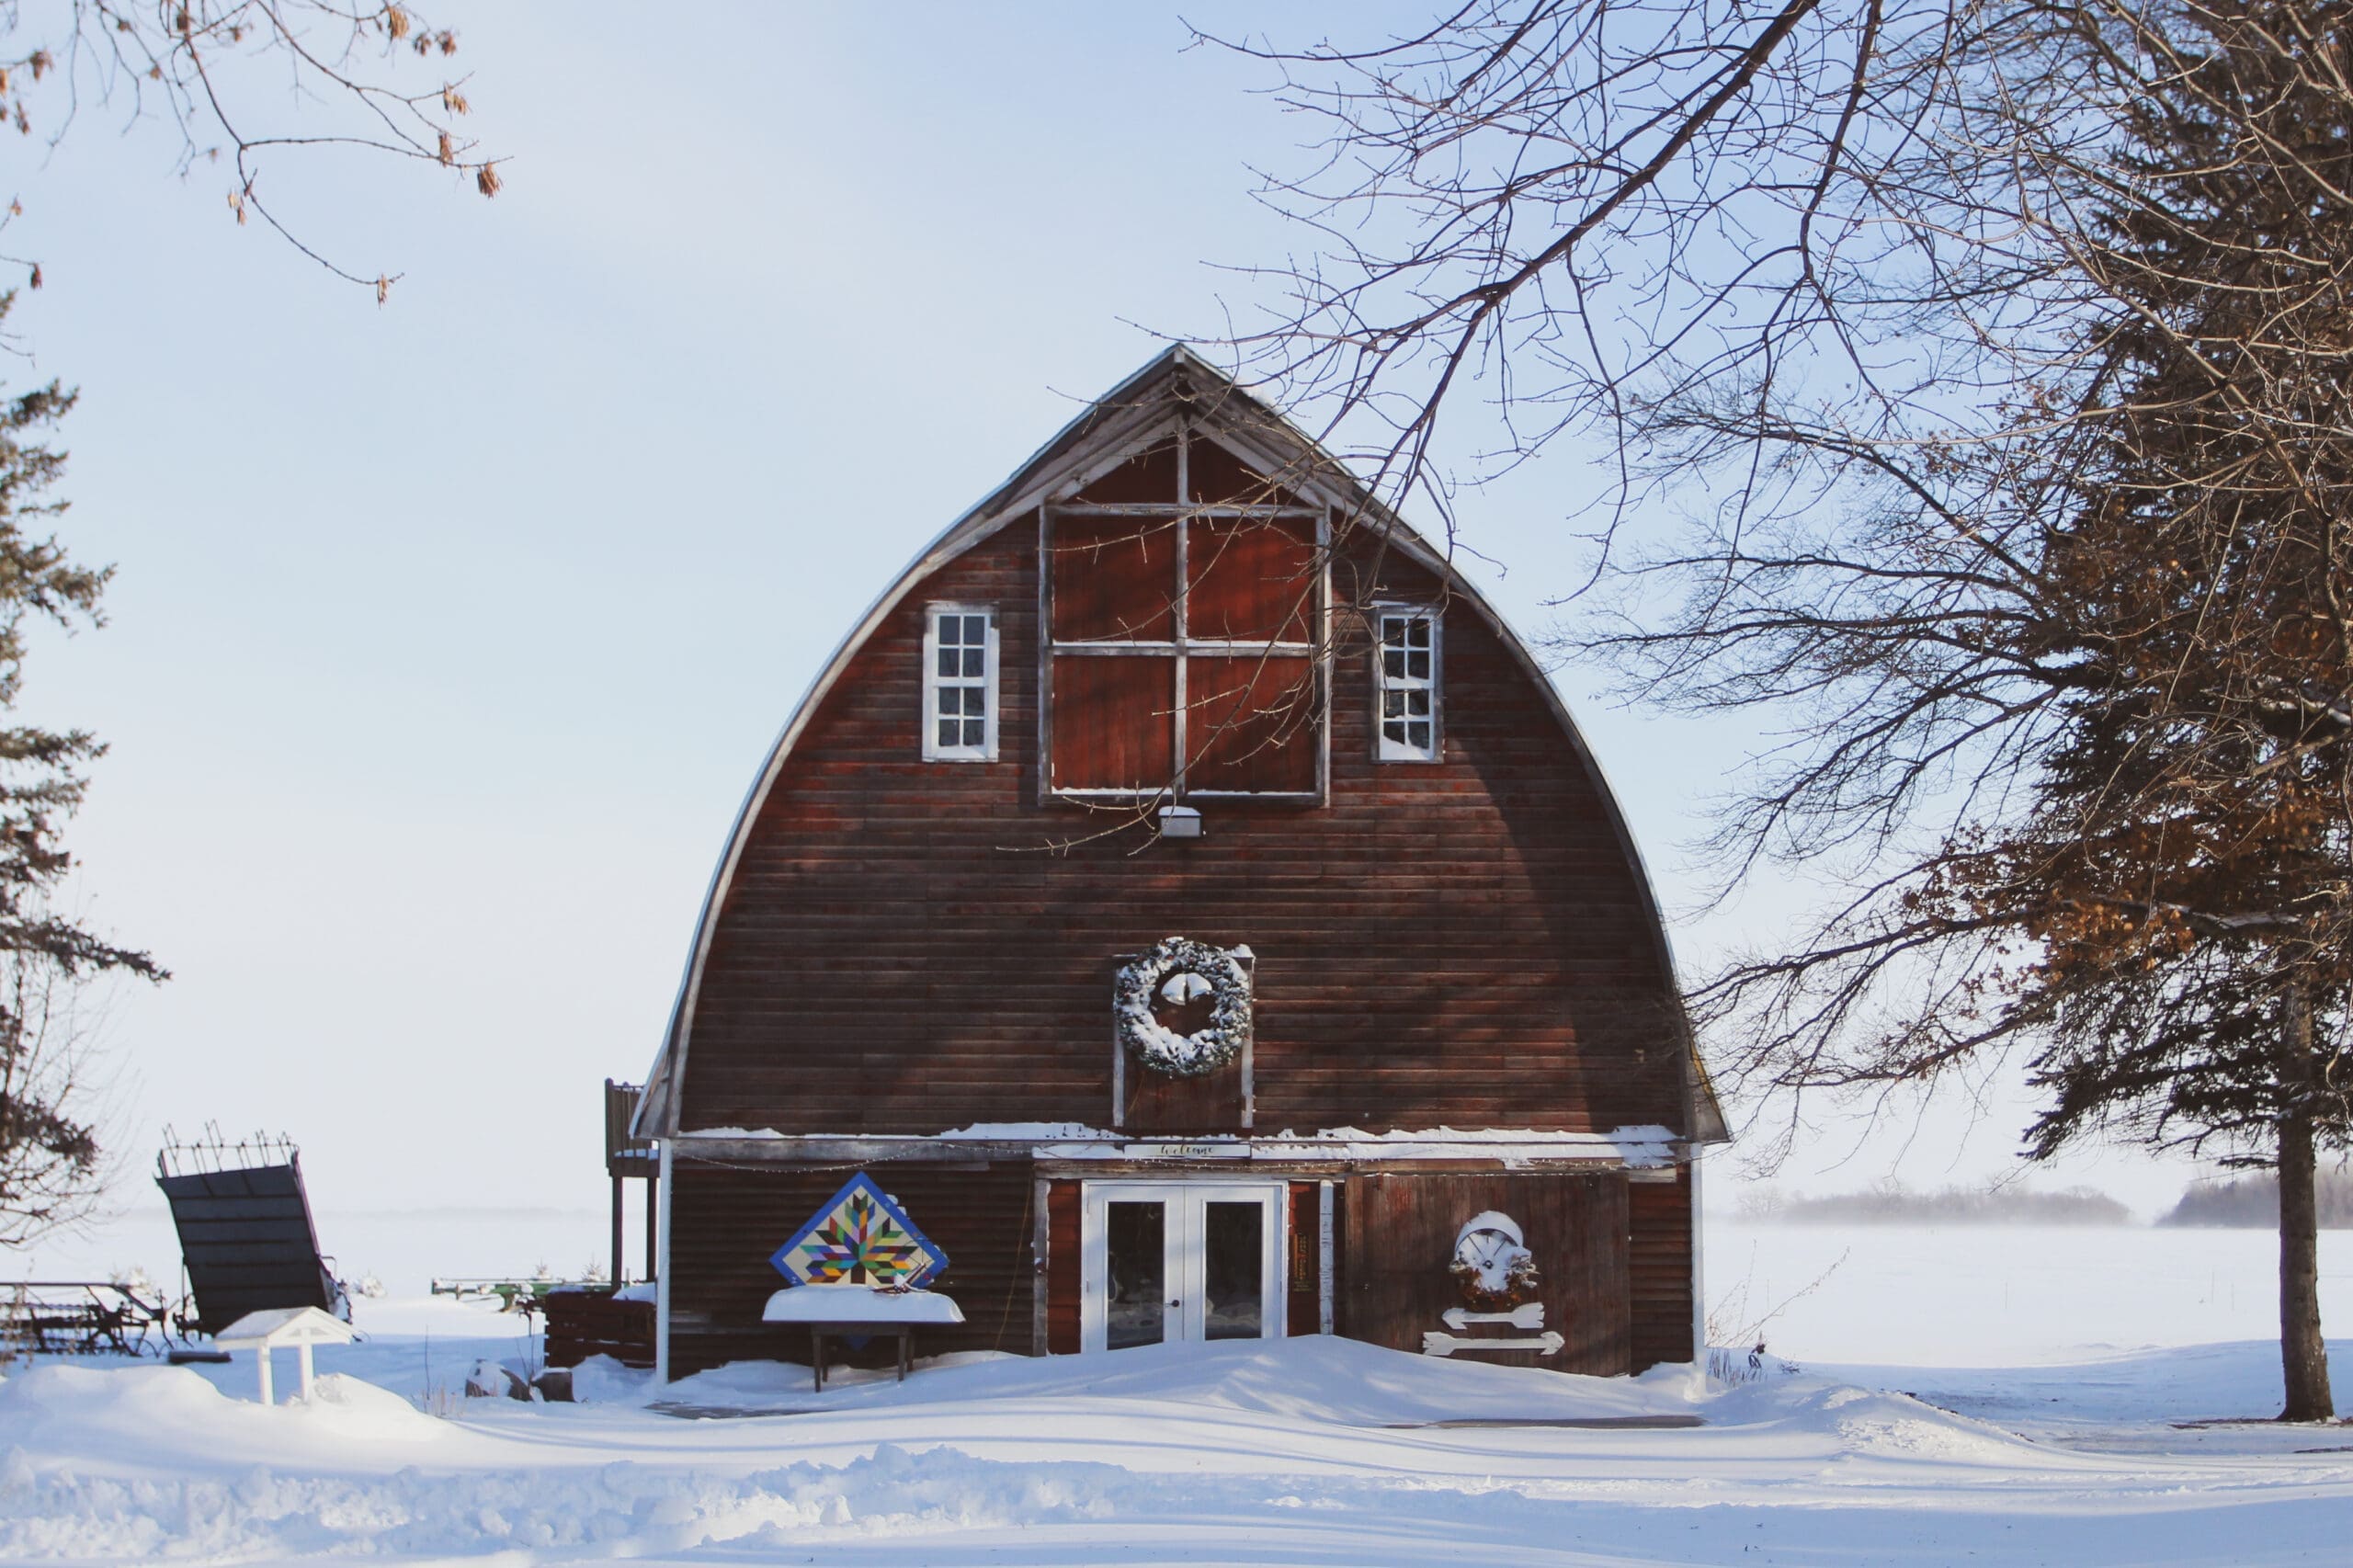 The Barn during winter at Crooked Lane Farm.